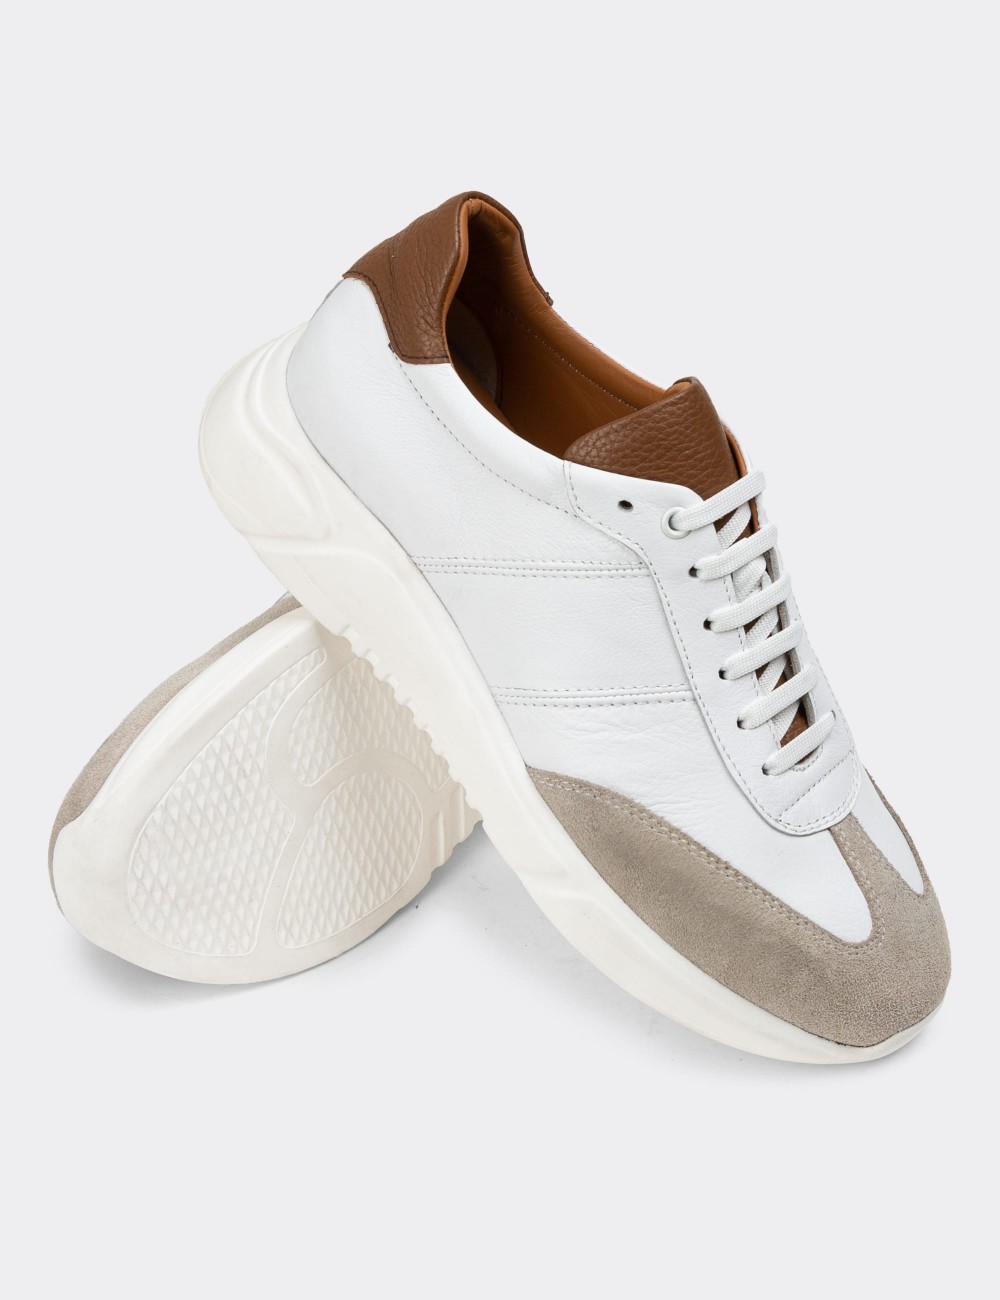 White Leather Sneakers - 01961MBYZP01